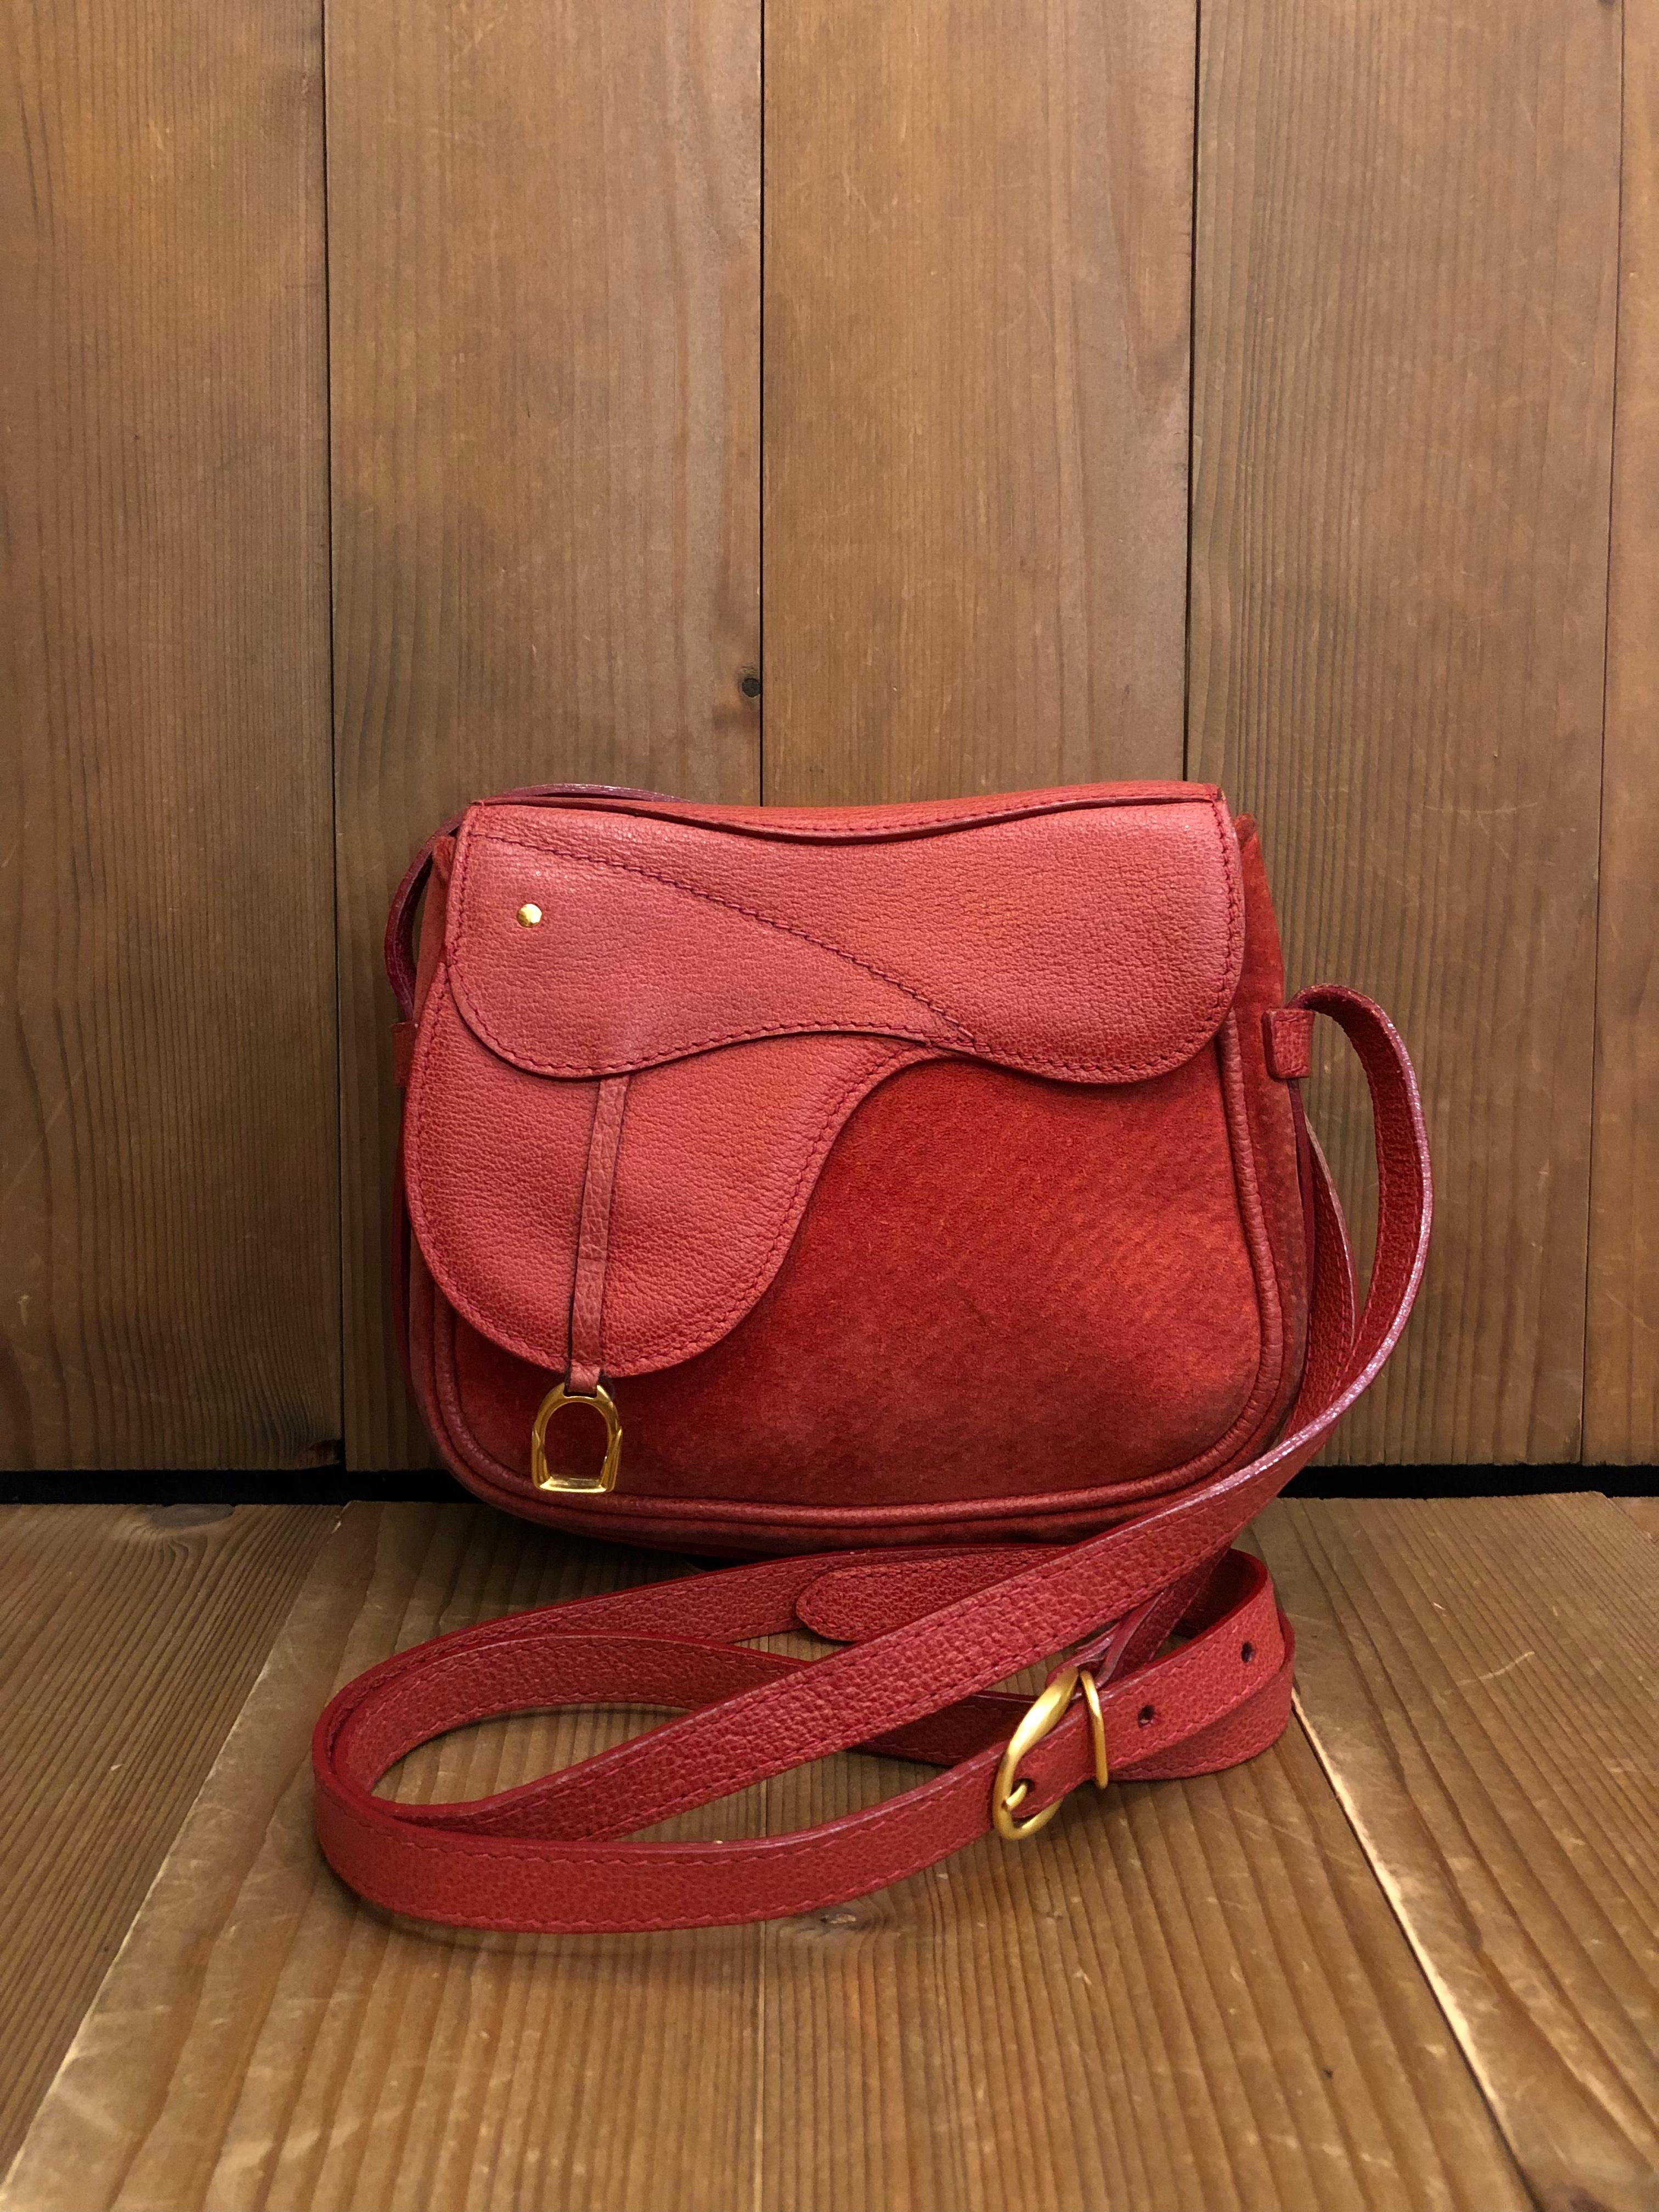 This vintage GUCCI mini saddle bag is crafted of suede and pigskin leather in red decorated with equestrian accent. This bag features a detachable crossbody strap of the same leather and leather loops at the back for securing on a belt to use it as